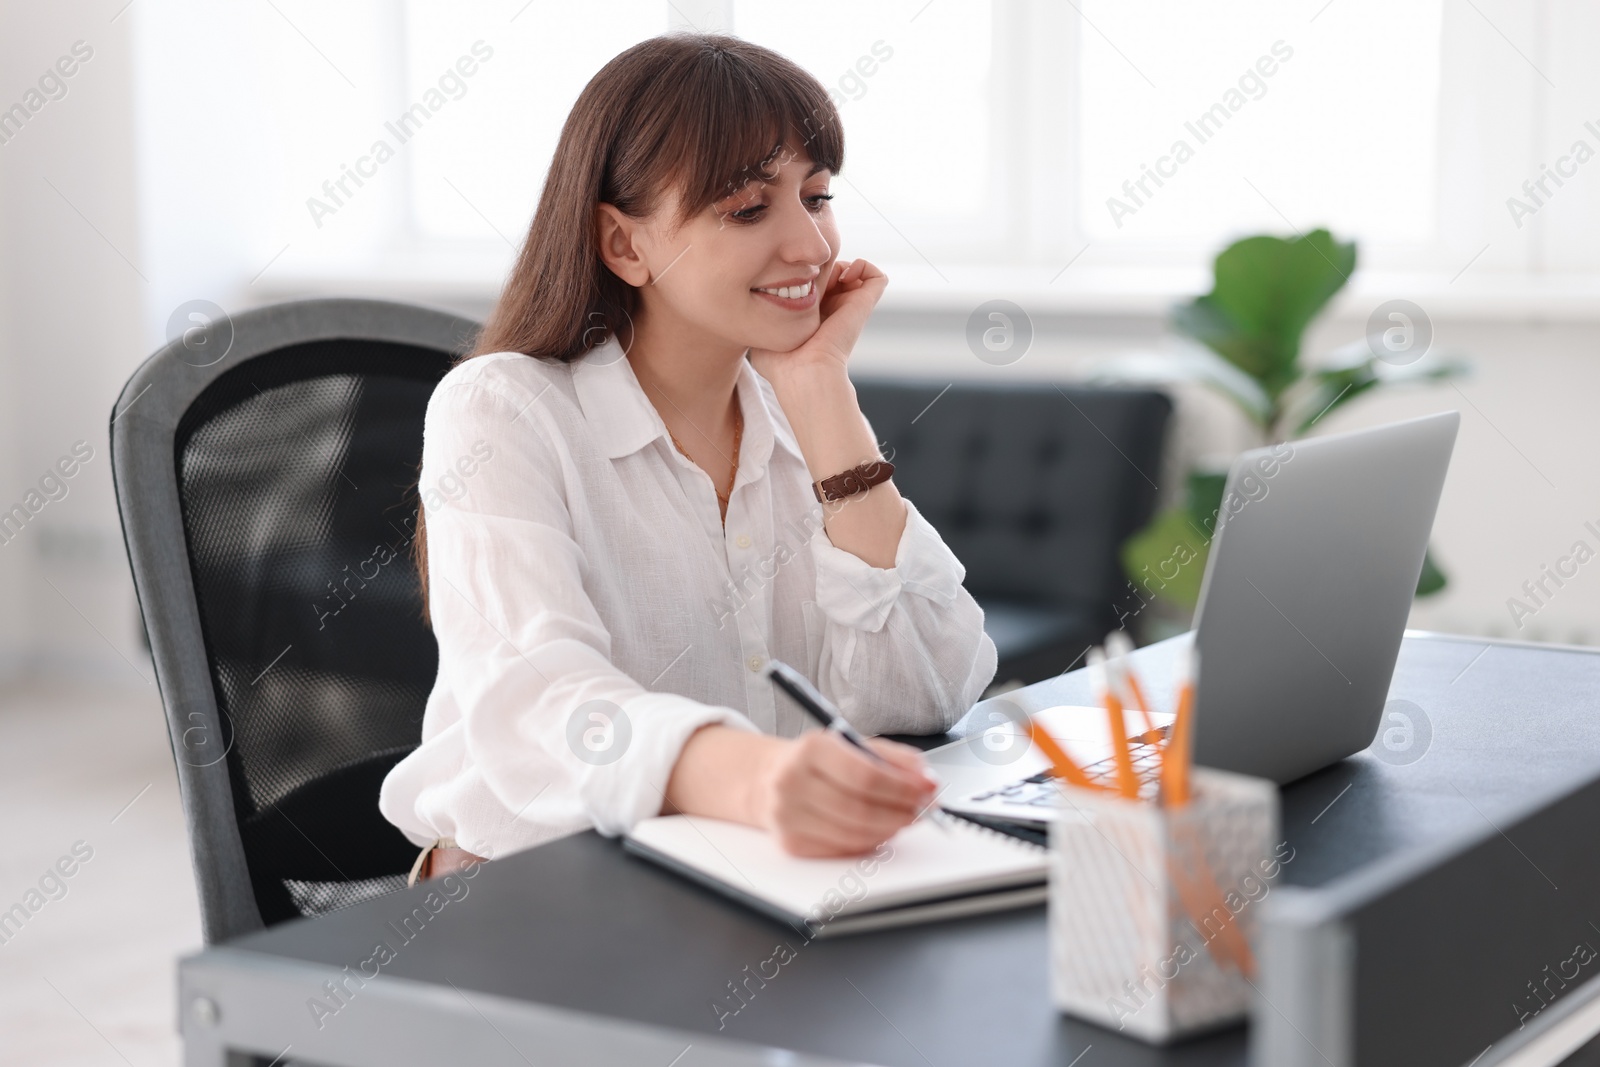 Photo of Woman taking notes during webinar at table indoors